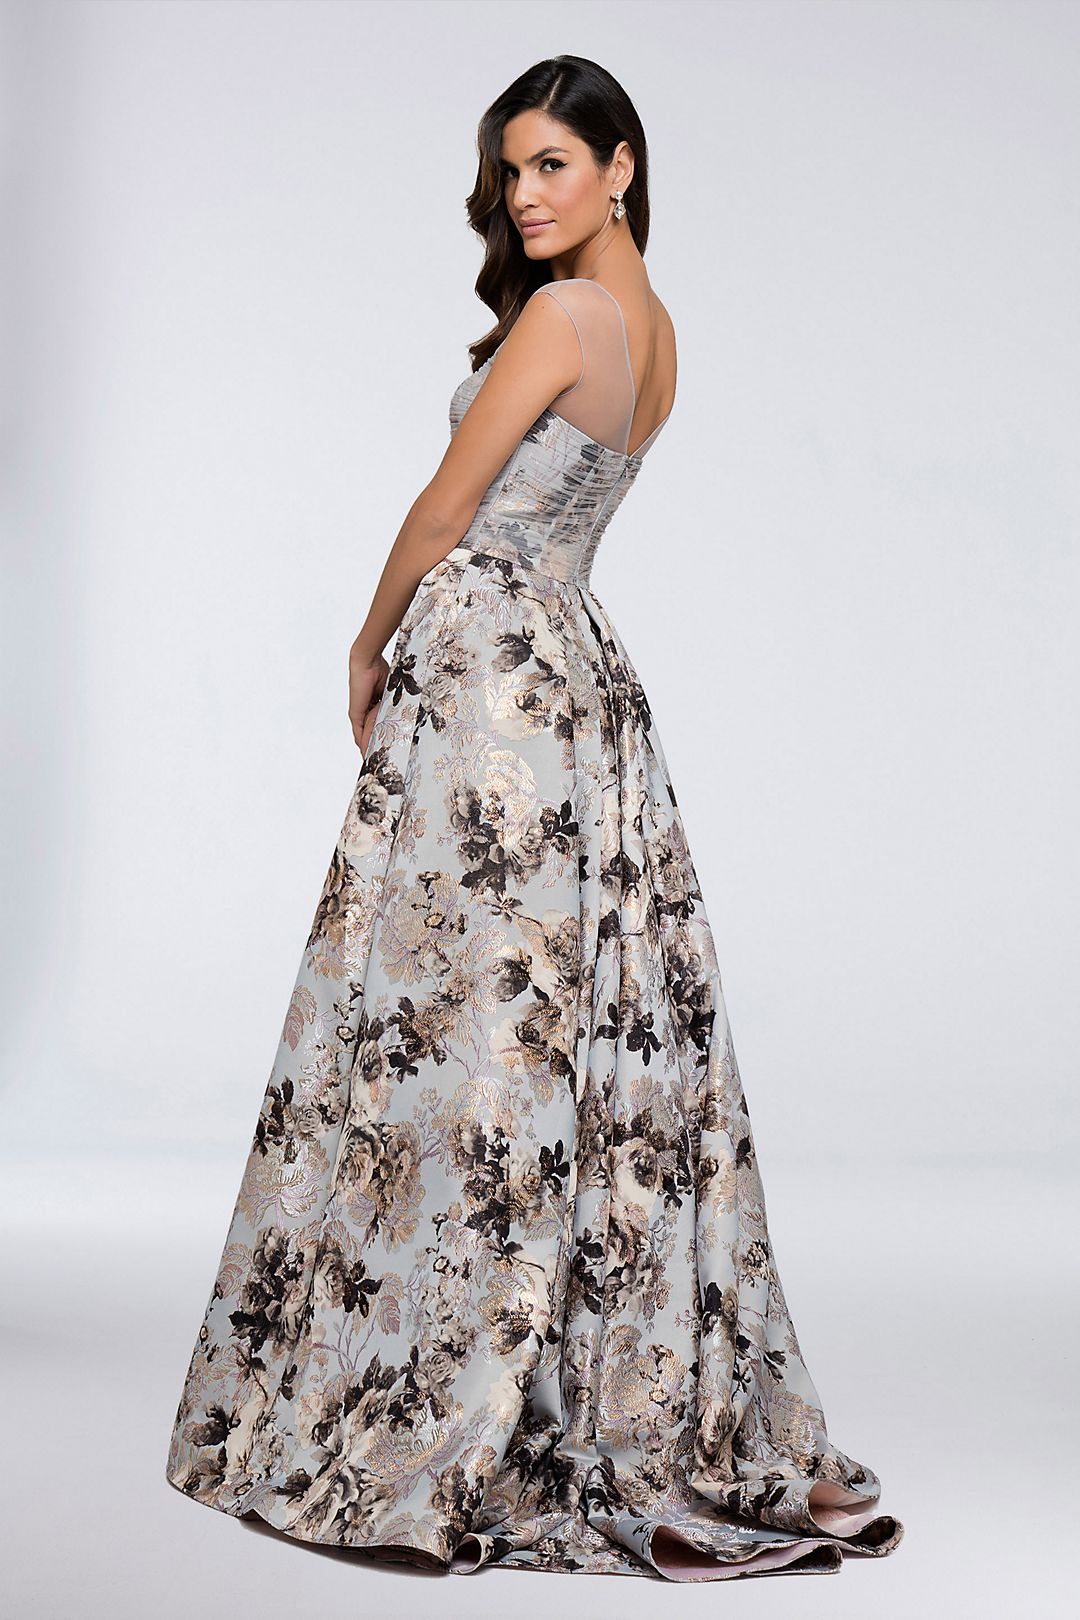 Embellished Brocade Illusion Neckline Ball Gown Image 2